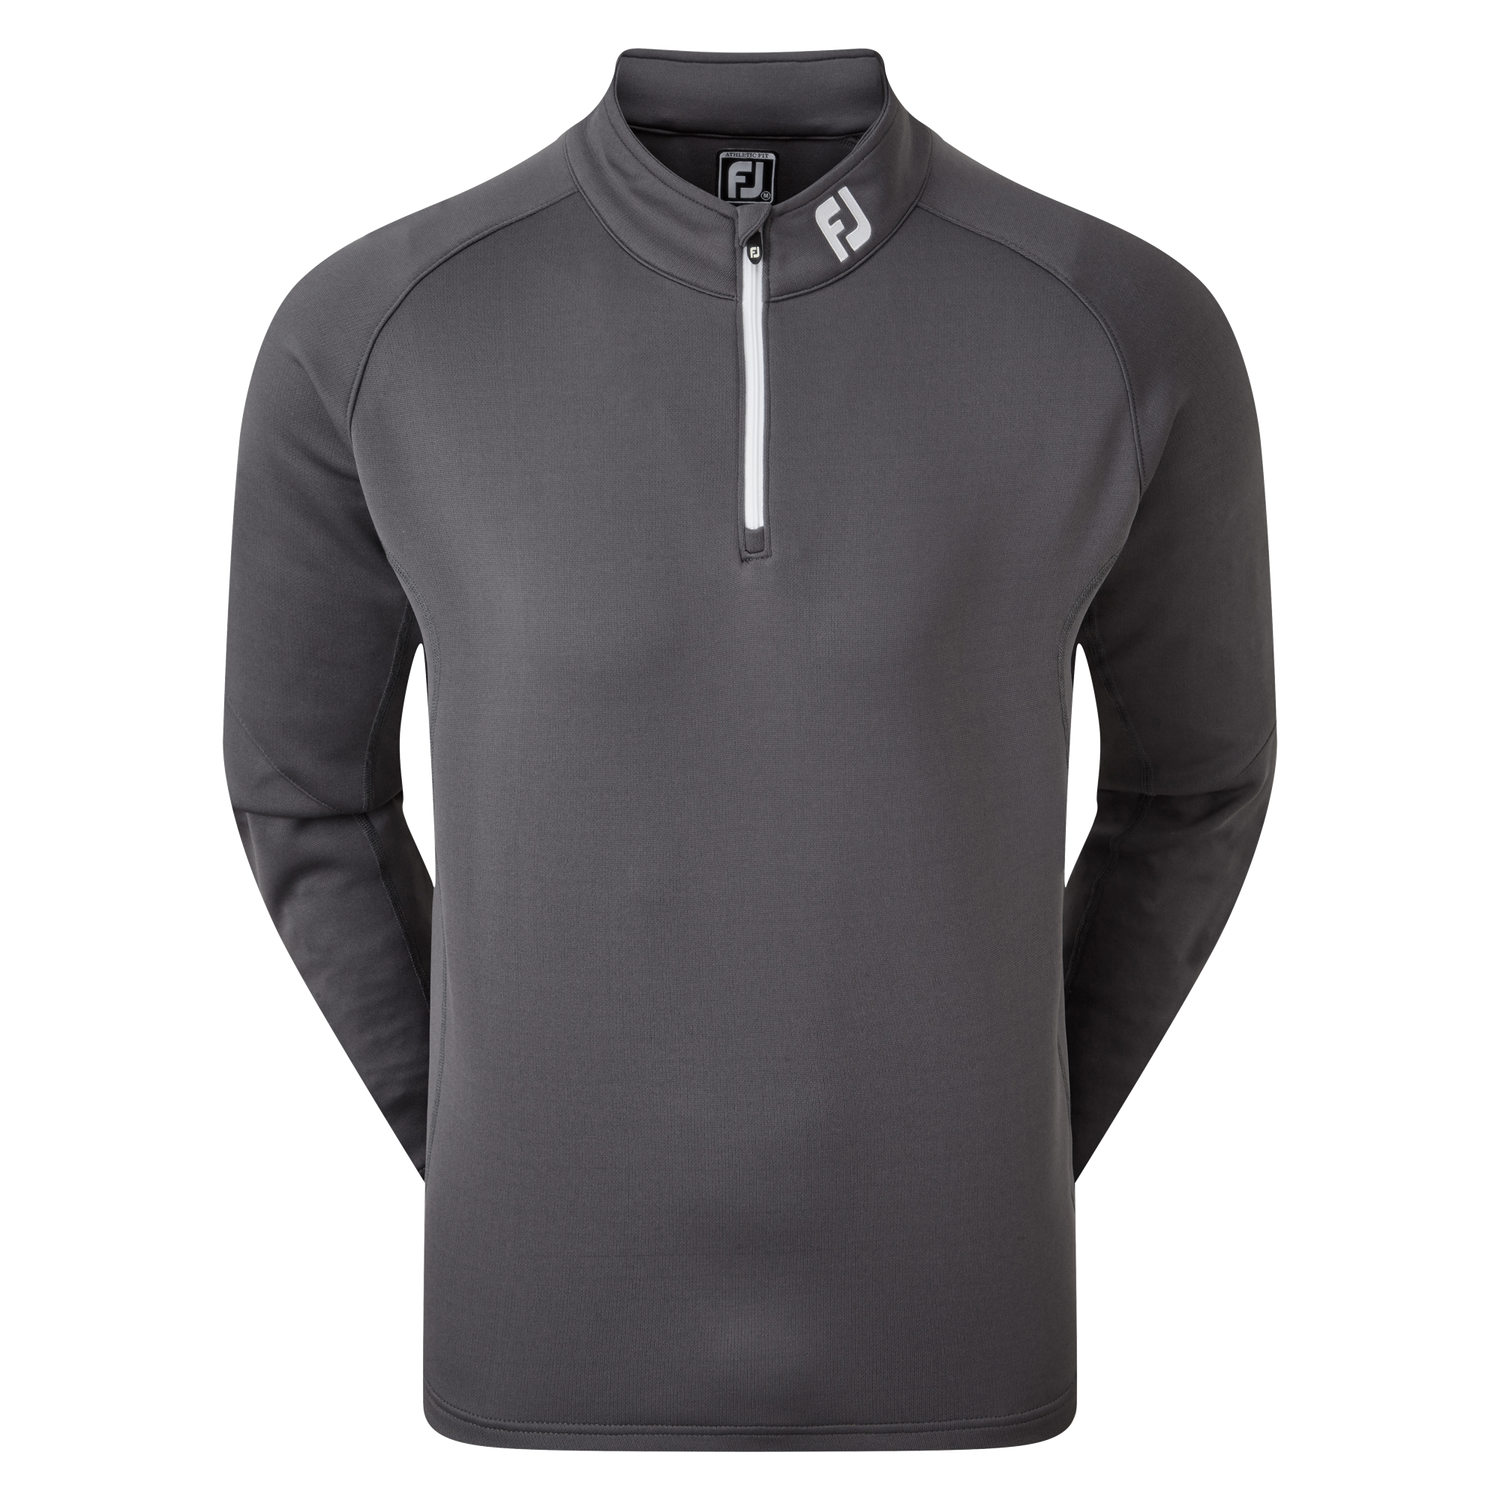 FootJoy Golf Chill Out 1/2 Zip Pullover Top 90397 Charcoal M 